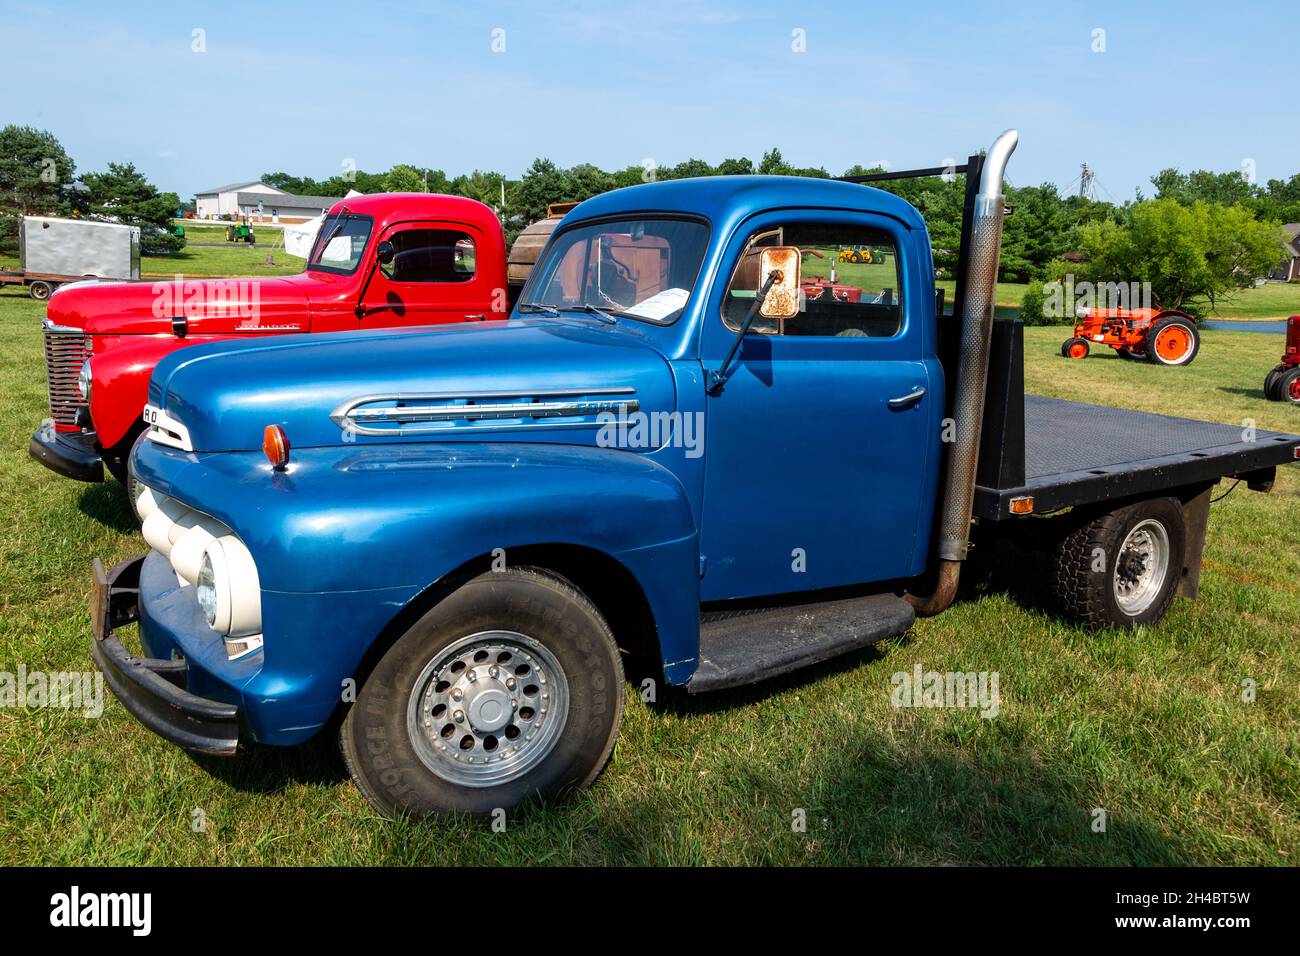 A blue antique 1951 Ford flatbed truck on display at a show in Warren, Indiana, USA. Stock Photo